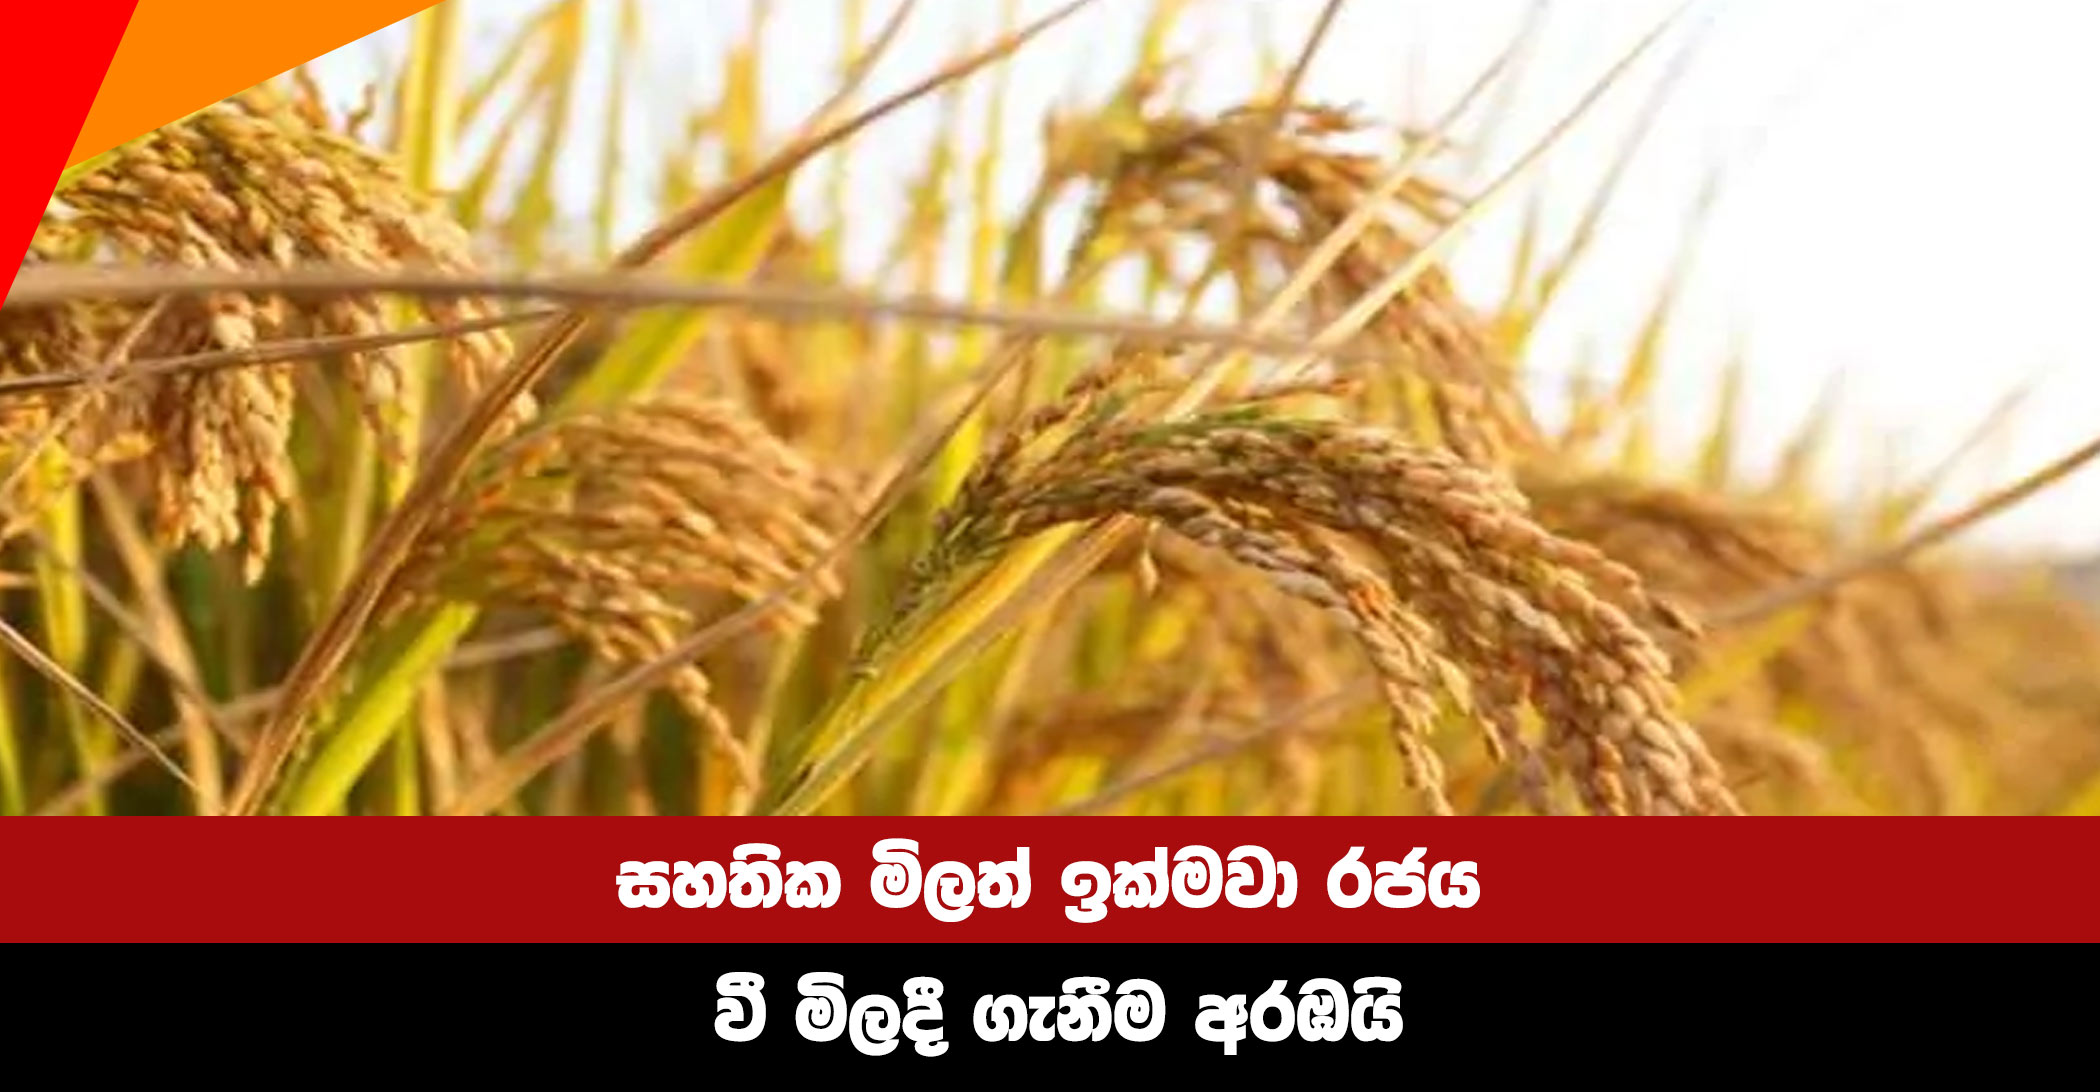 The-government-will-start-purchasing-paddy-in-excess-of-the-guaranteed-price